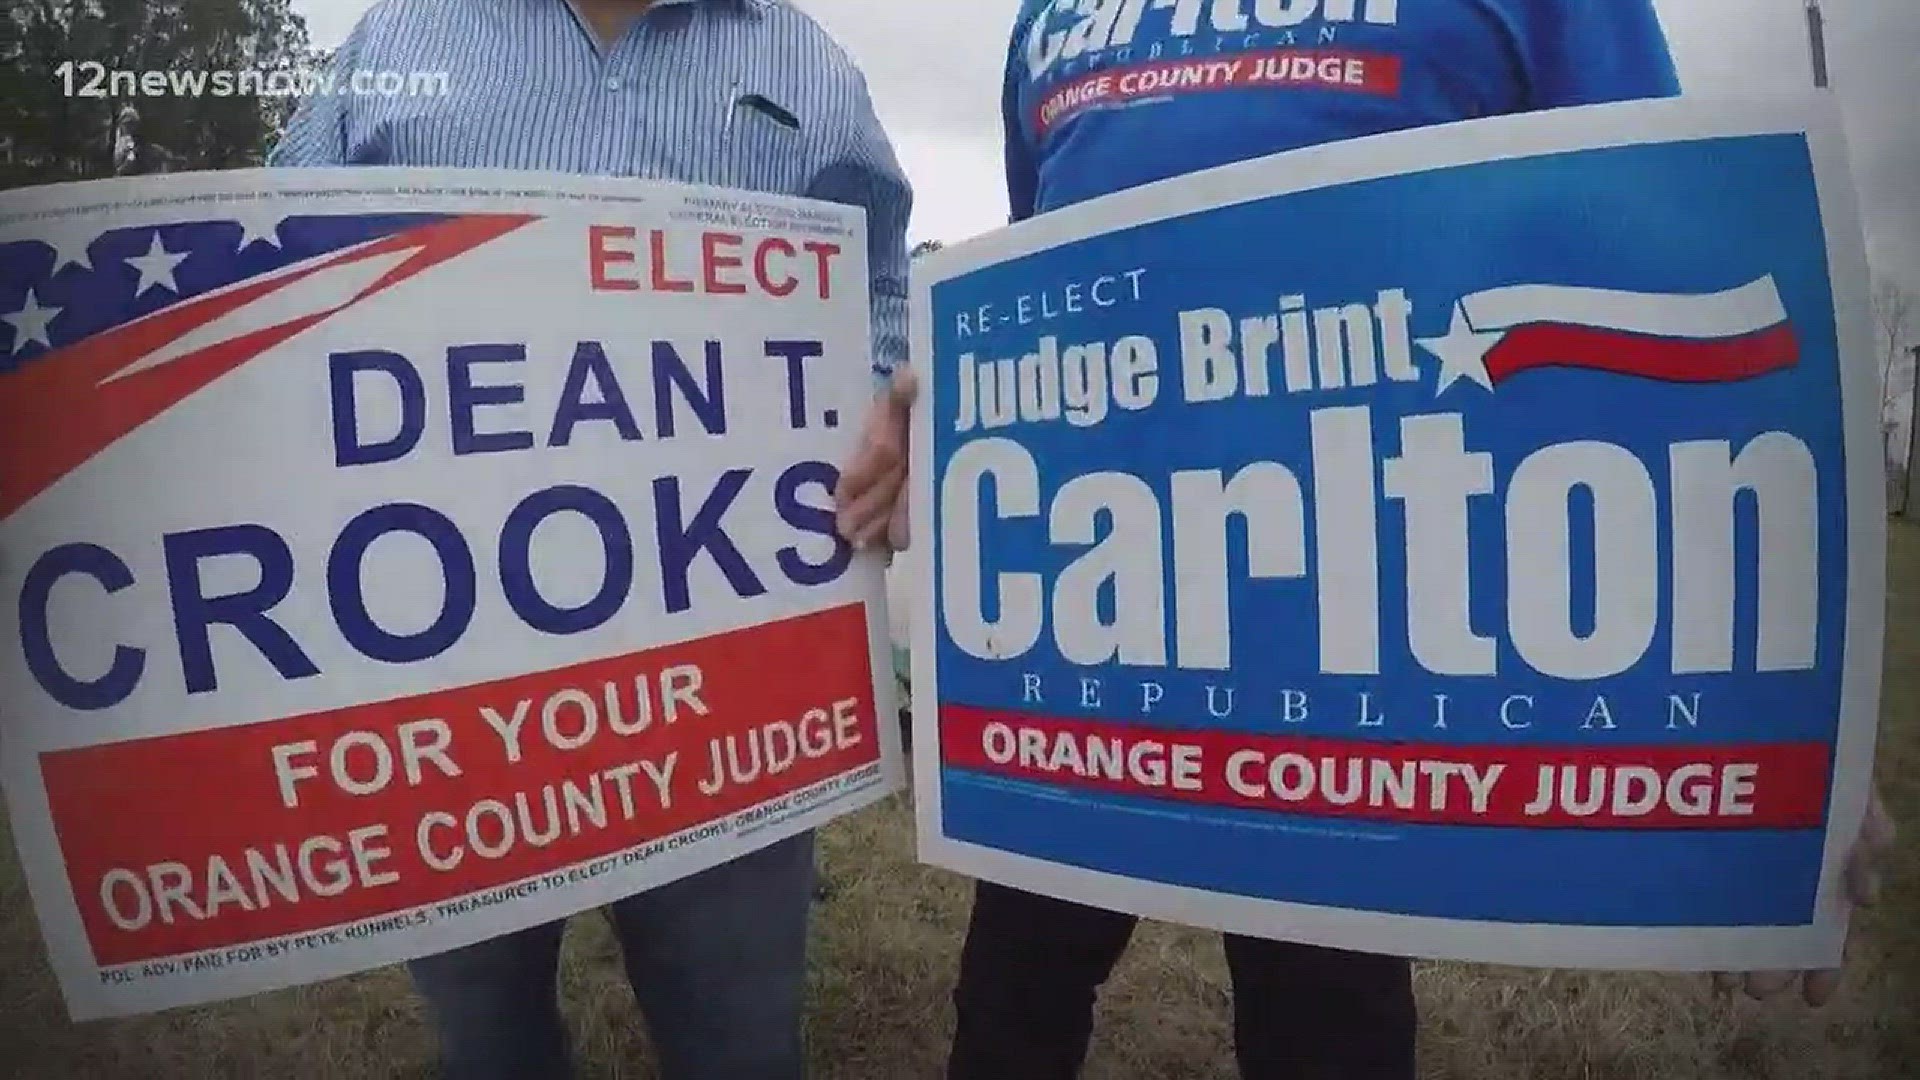 Two Republican candidates will face off to be Orange County Judge, and the only Democrat in the race has been taken off the November ballot.